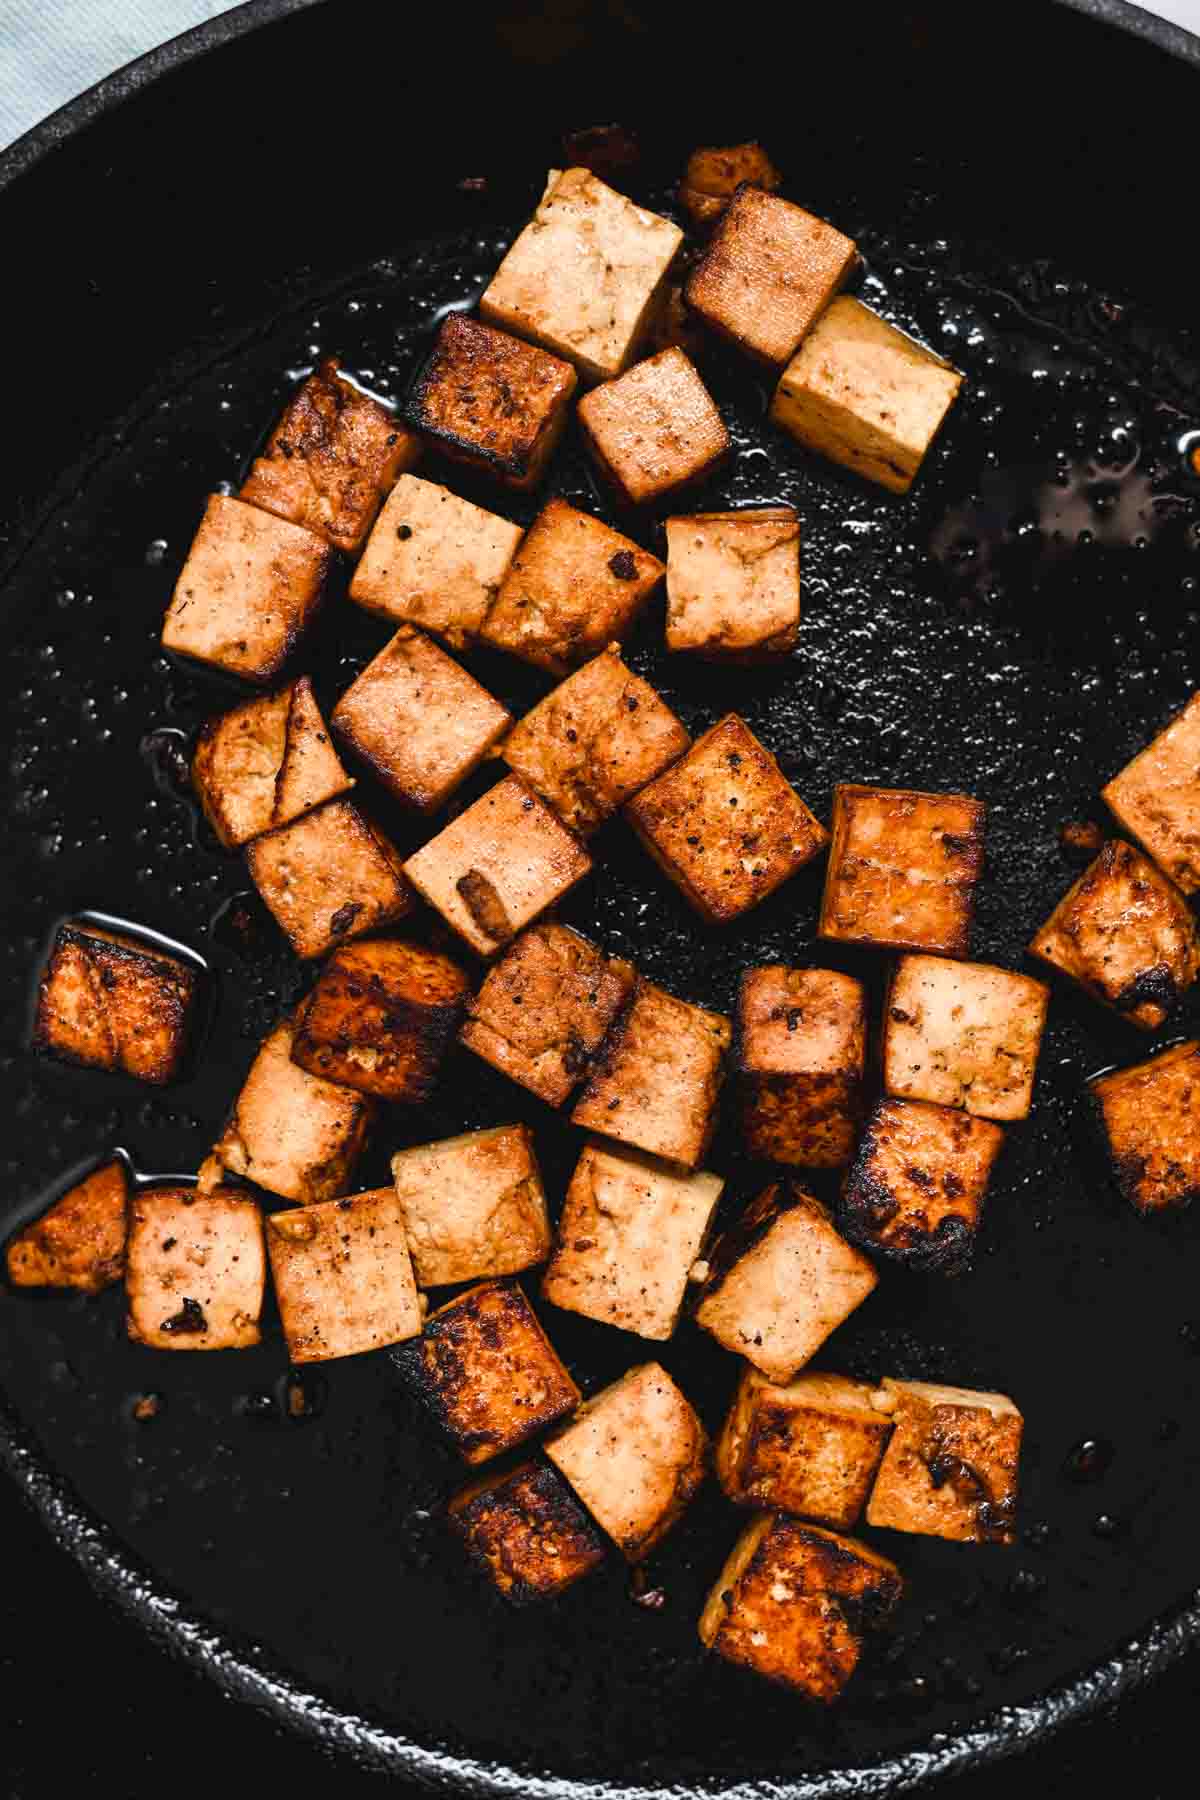 Golden tofu in a cast iron skillet.